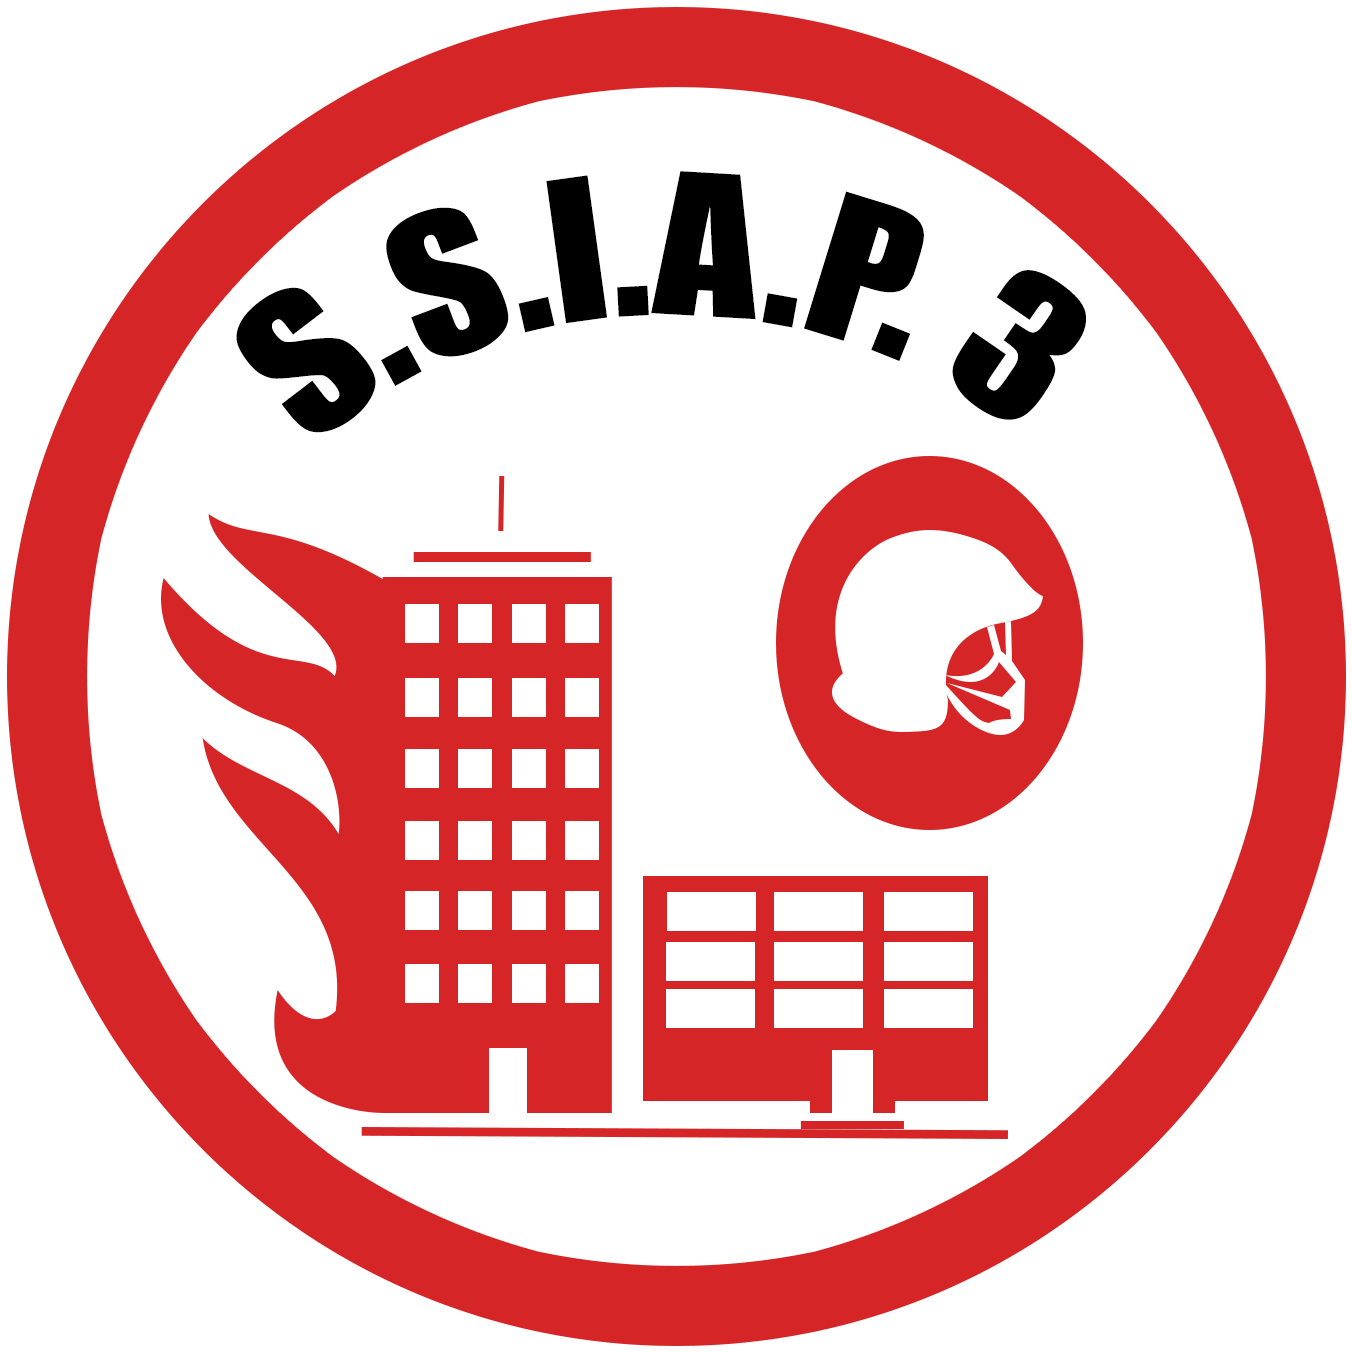 logo-formation-ssiap3.png